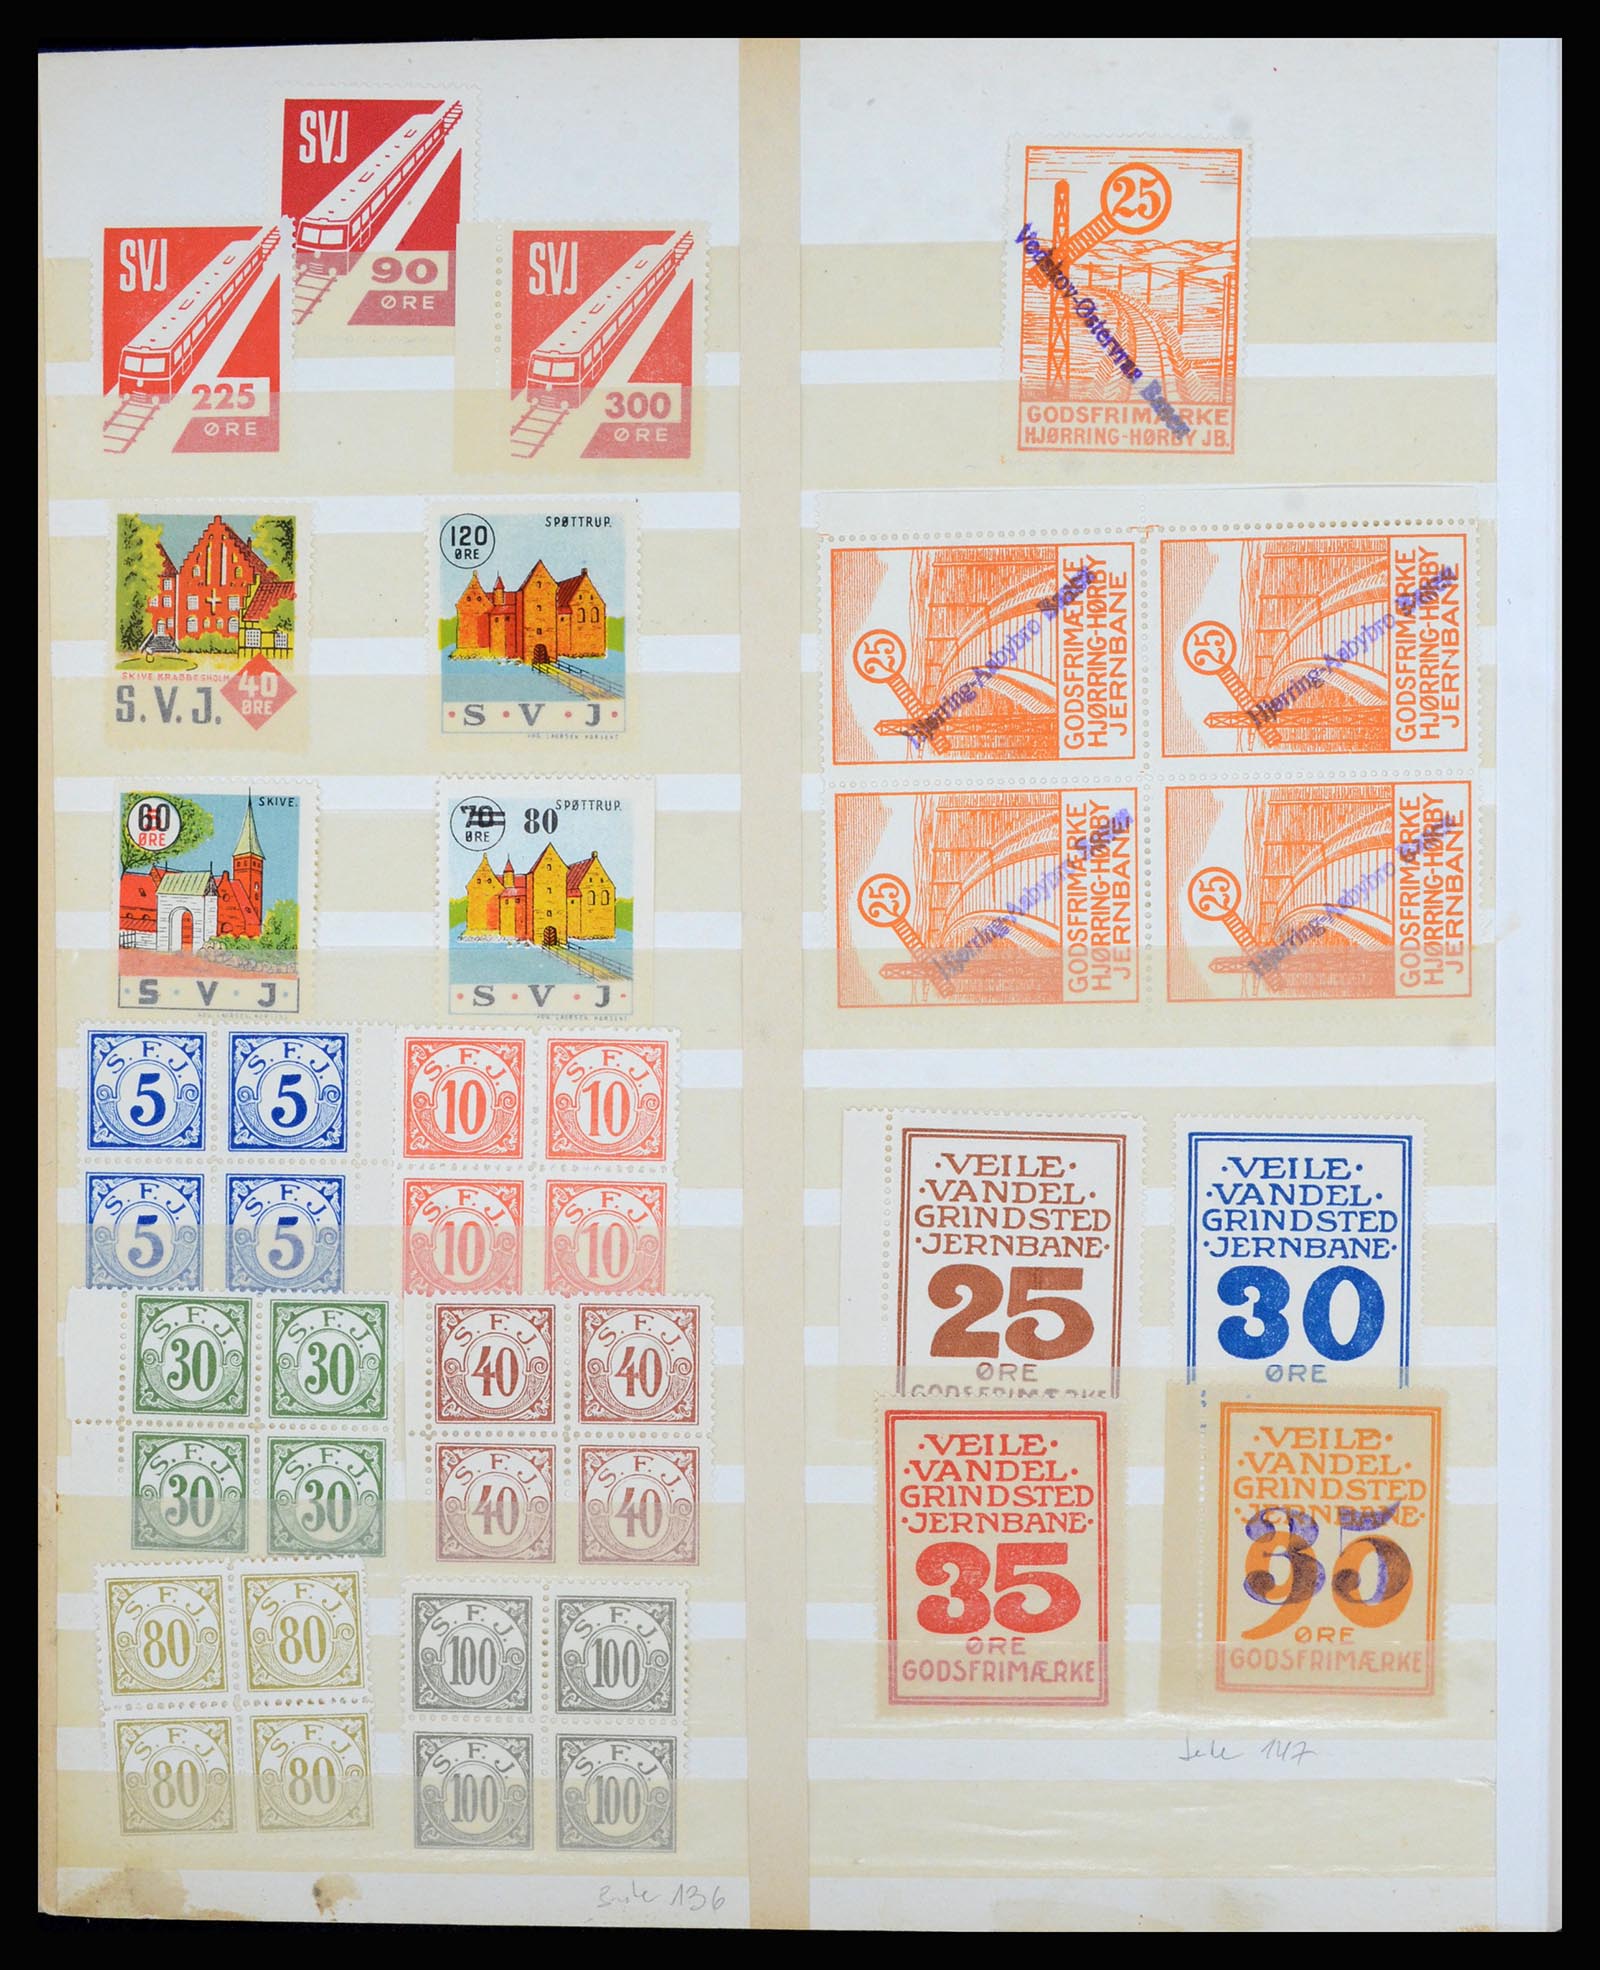 36767 018 - Stamp collection 36767 Denmark railroadstamps.